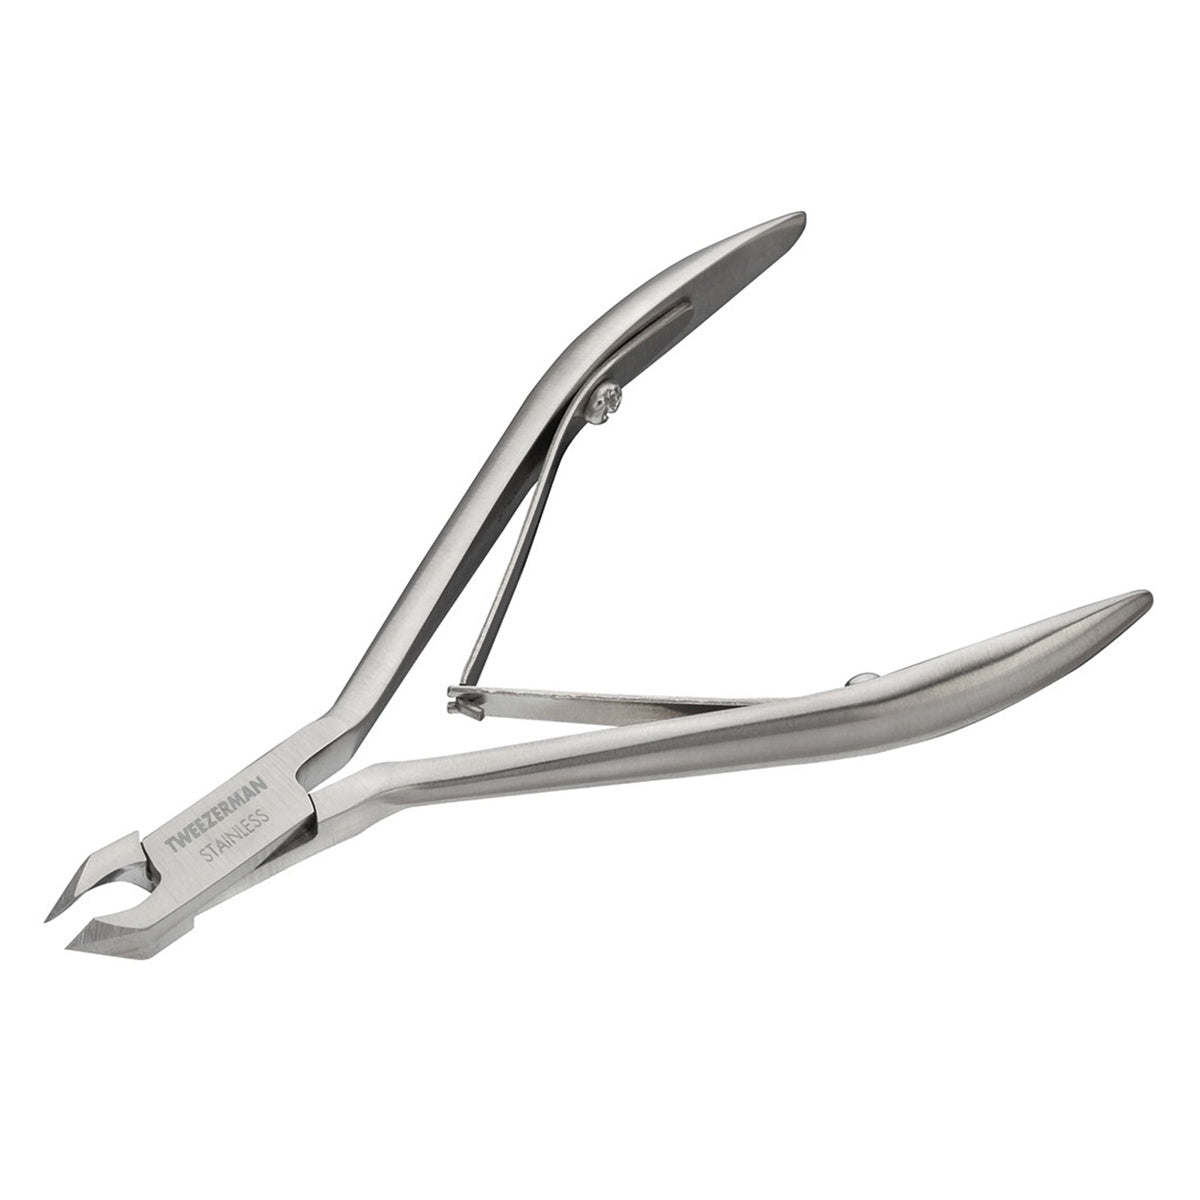 Primary image of Rockhard Cuticle Nipper